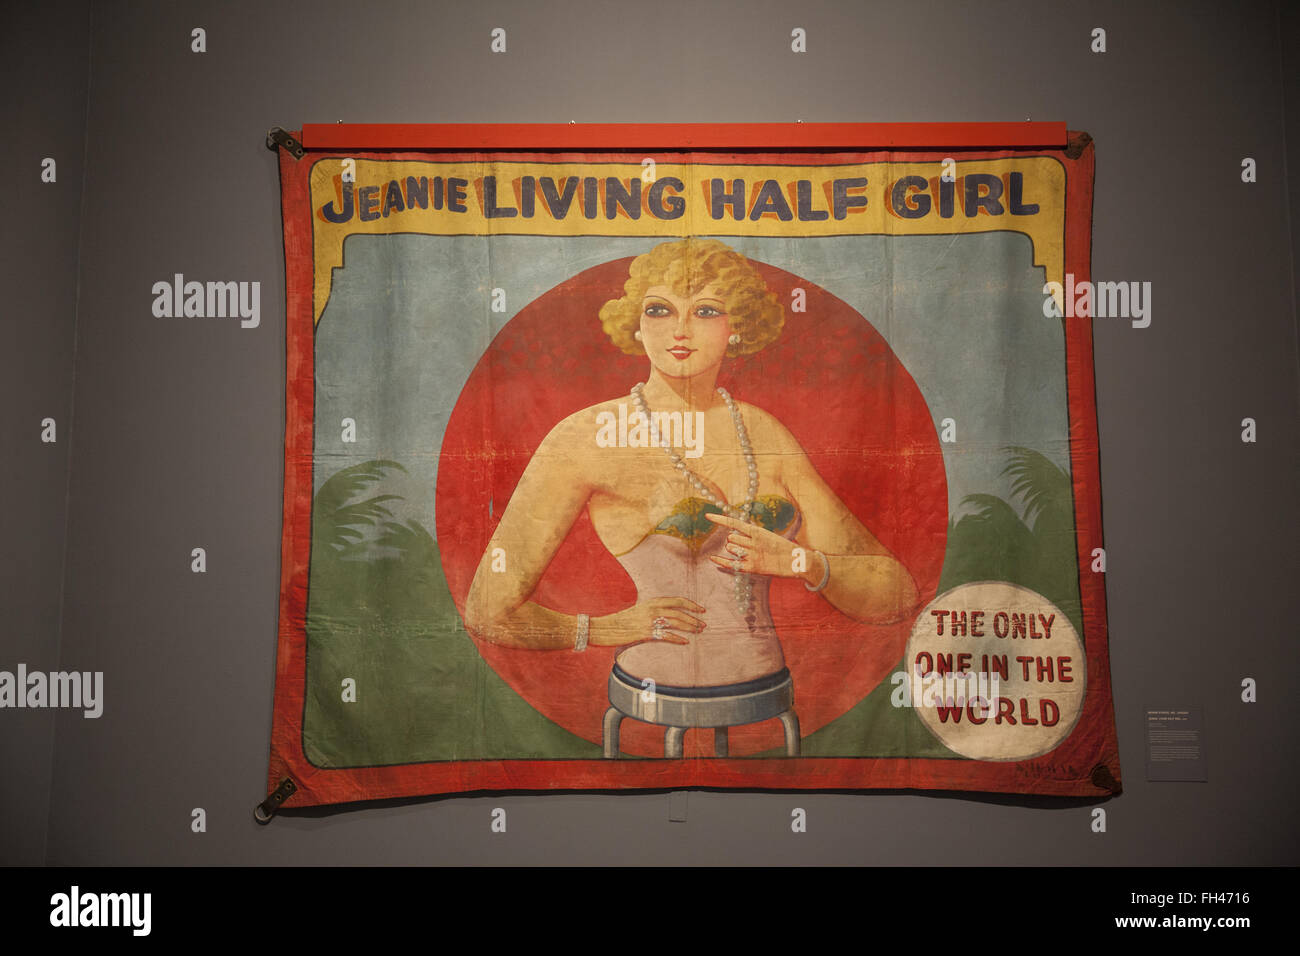 Original hand painted banners advertising acts in the 'Freak Show' at Coney Island shown here at the Coney Island Exhibition at the Brooklyn Museum. Stock Photo